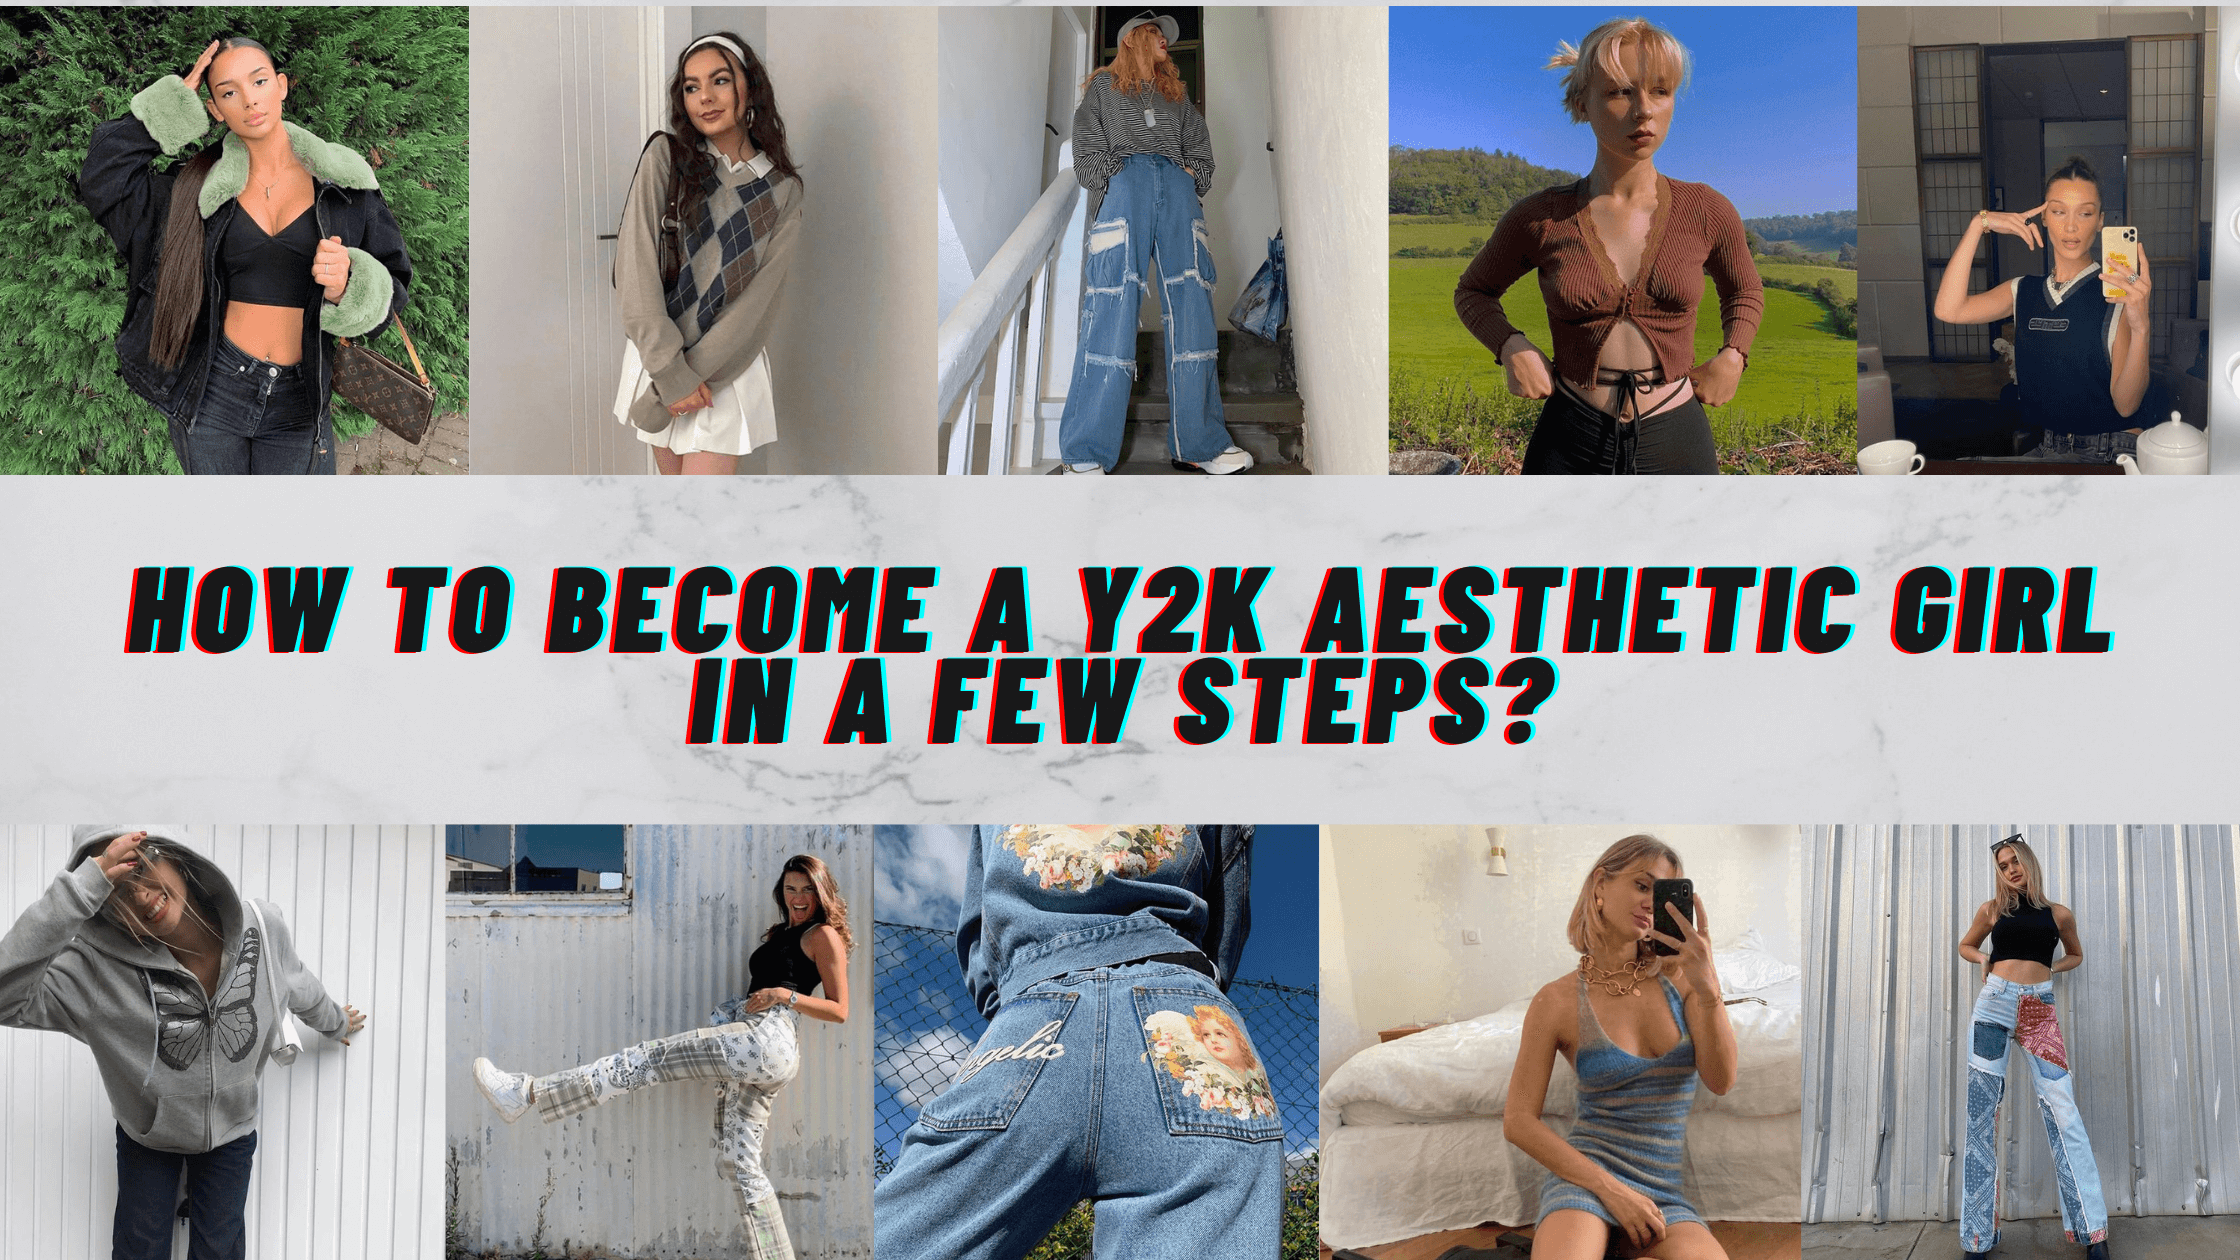 HOW TO BECOME A Y2K AESTHETIC GIRL IN A FEW STEPS? - Cosmique Studio - Aesthetic  Clothing